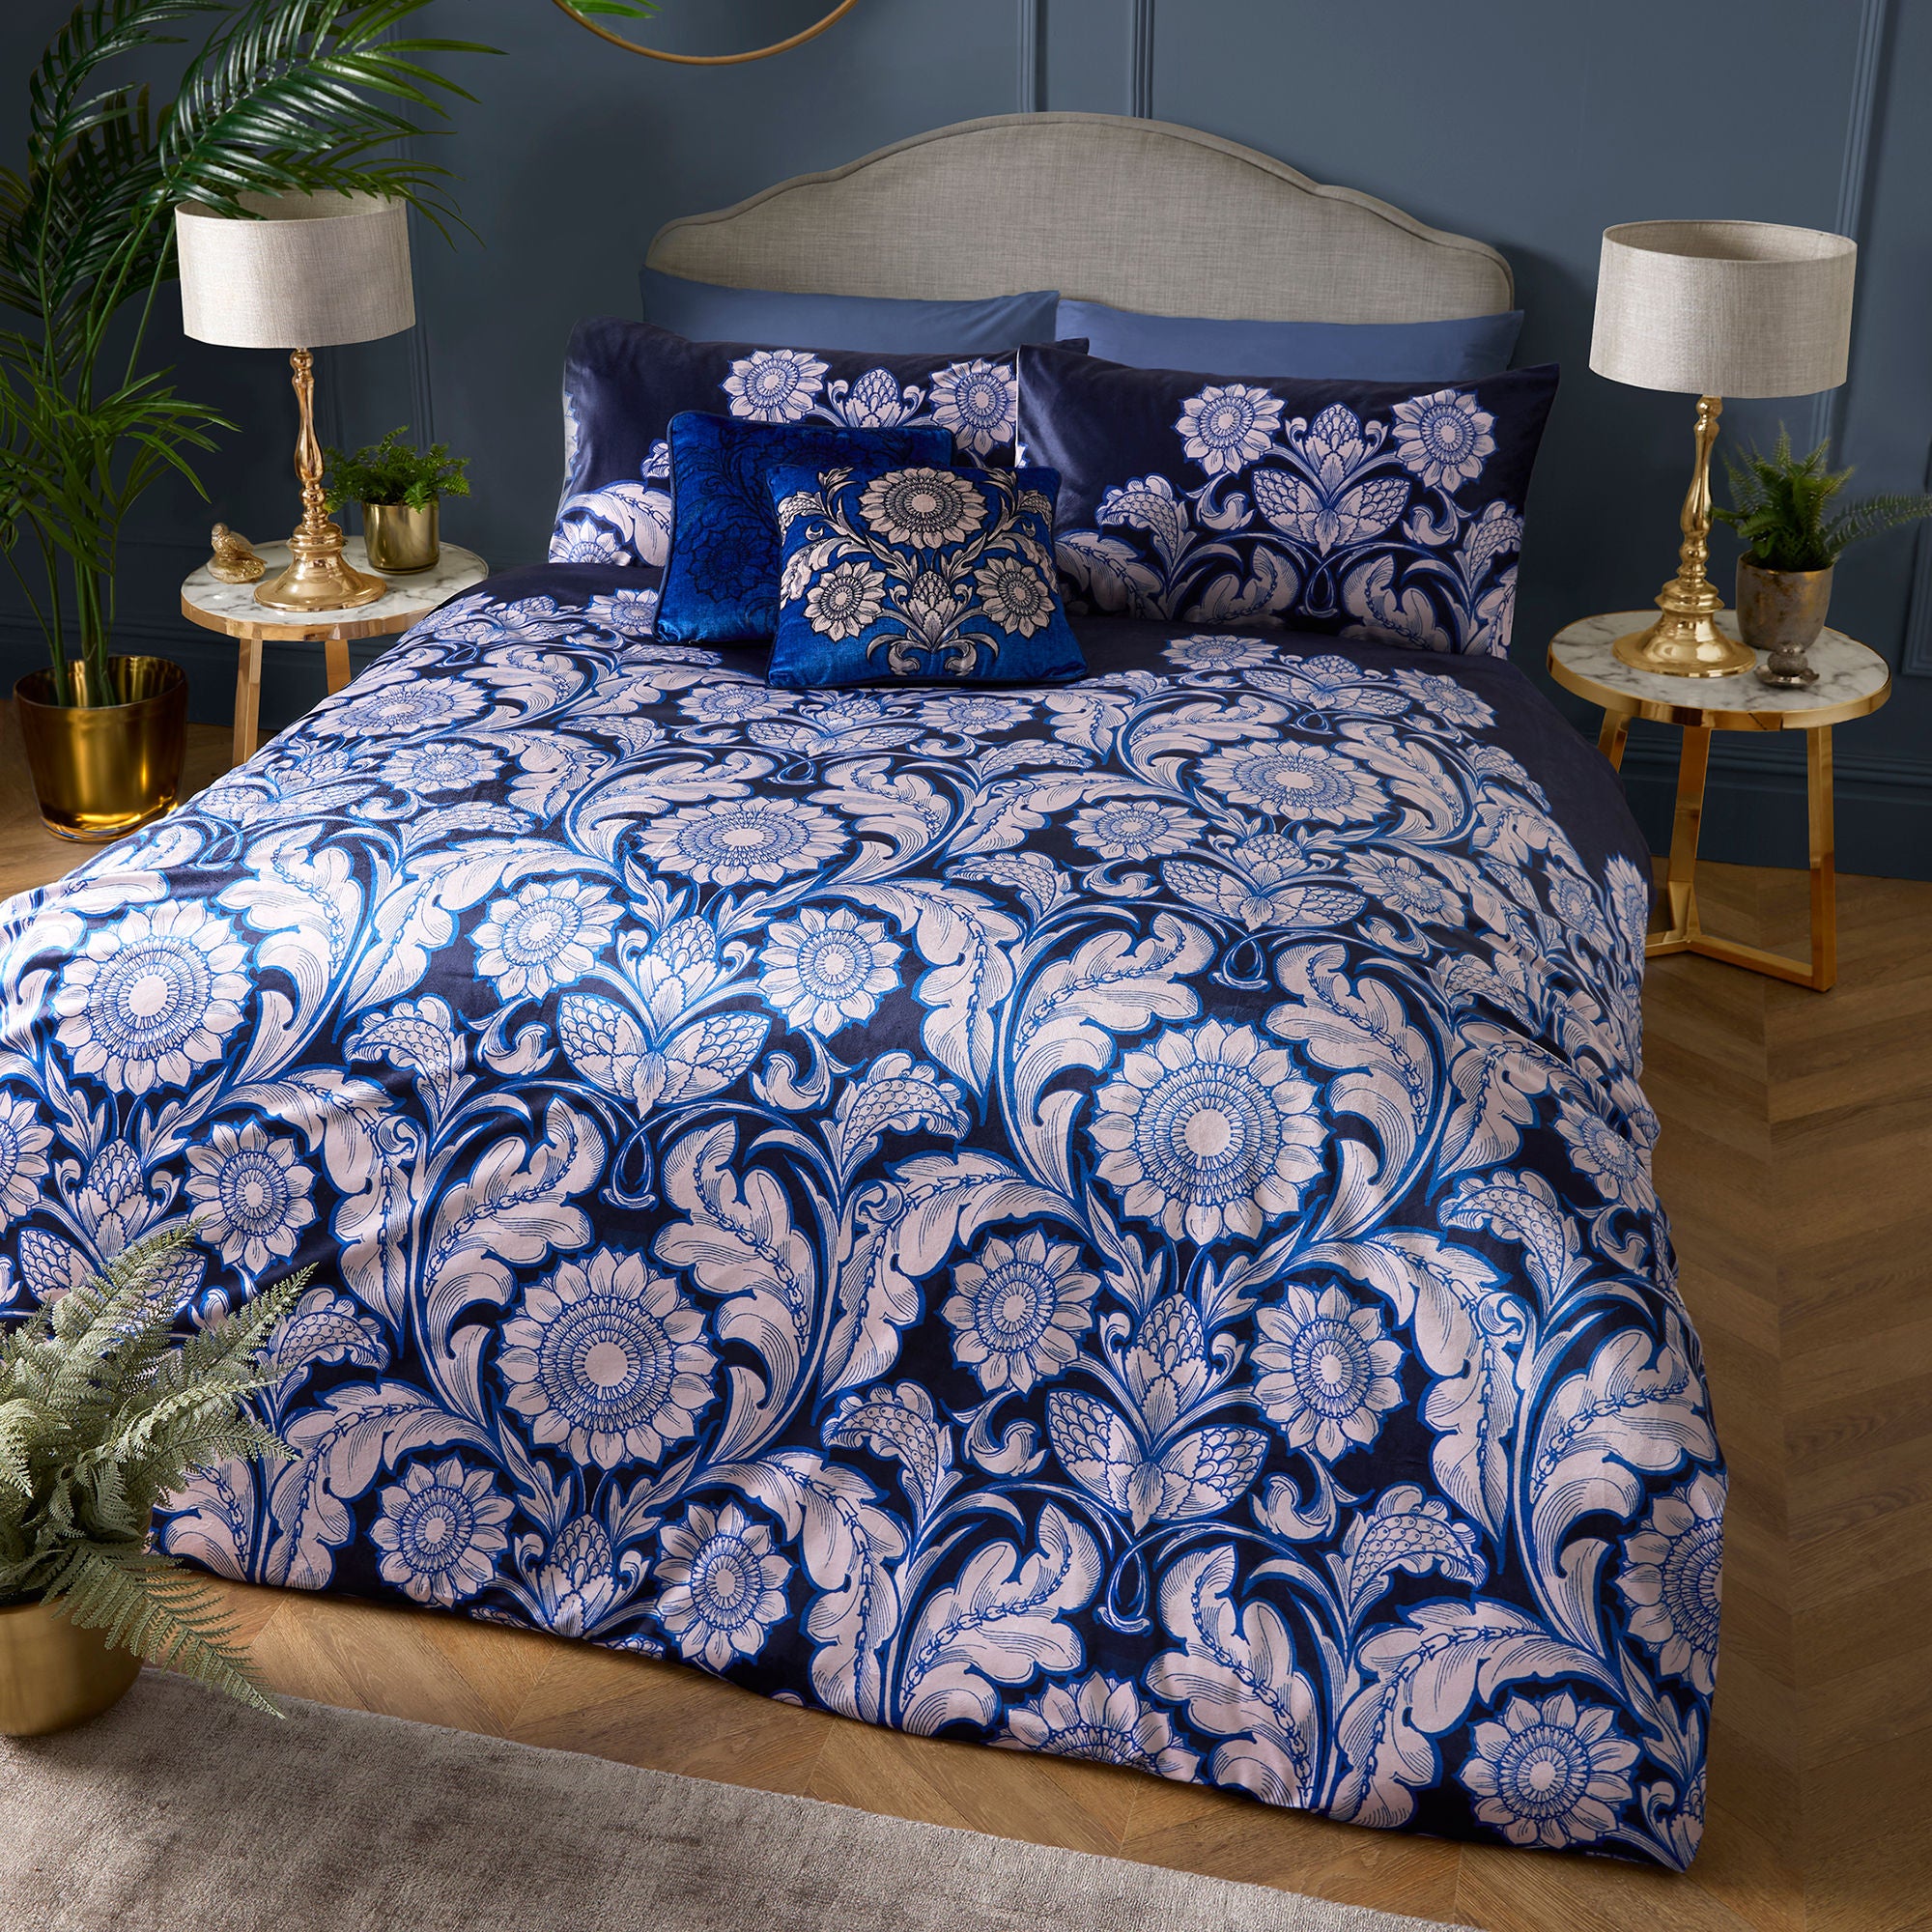 Romilly Duvet Cover Set by Laurence Llewelyn-Bowen in Blue - Duvet Cover Set - Laurence Llewelyn-Bowen